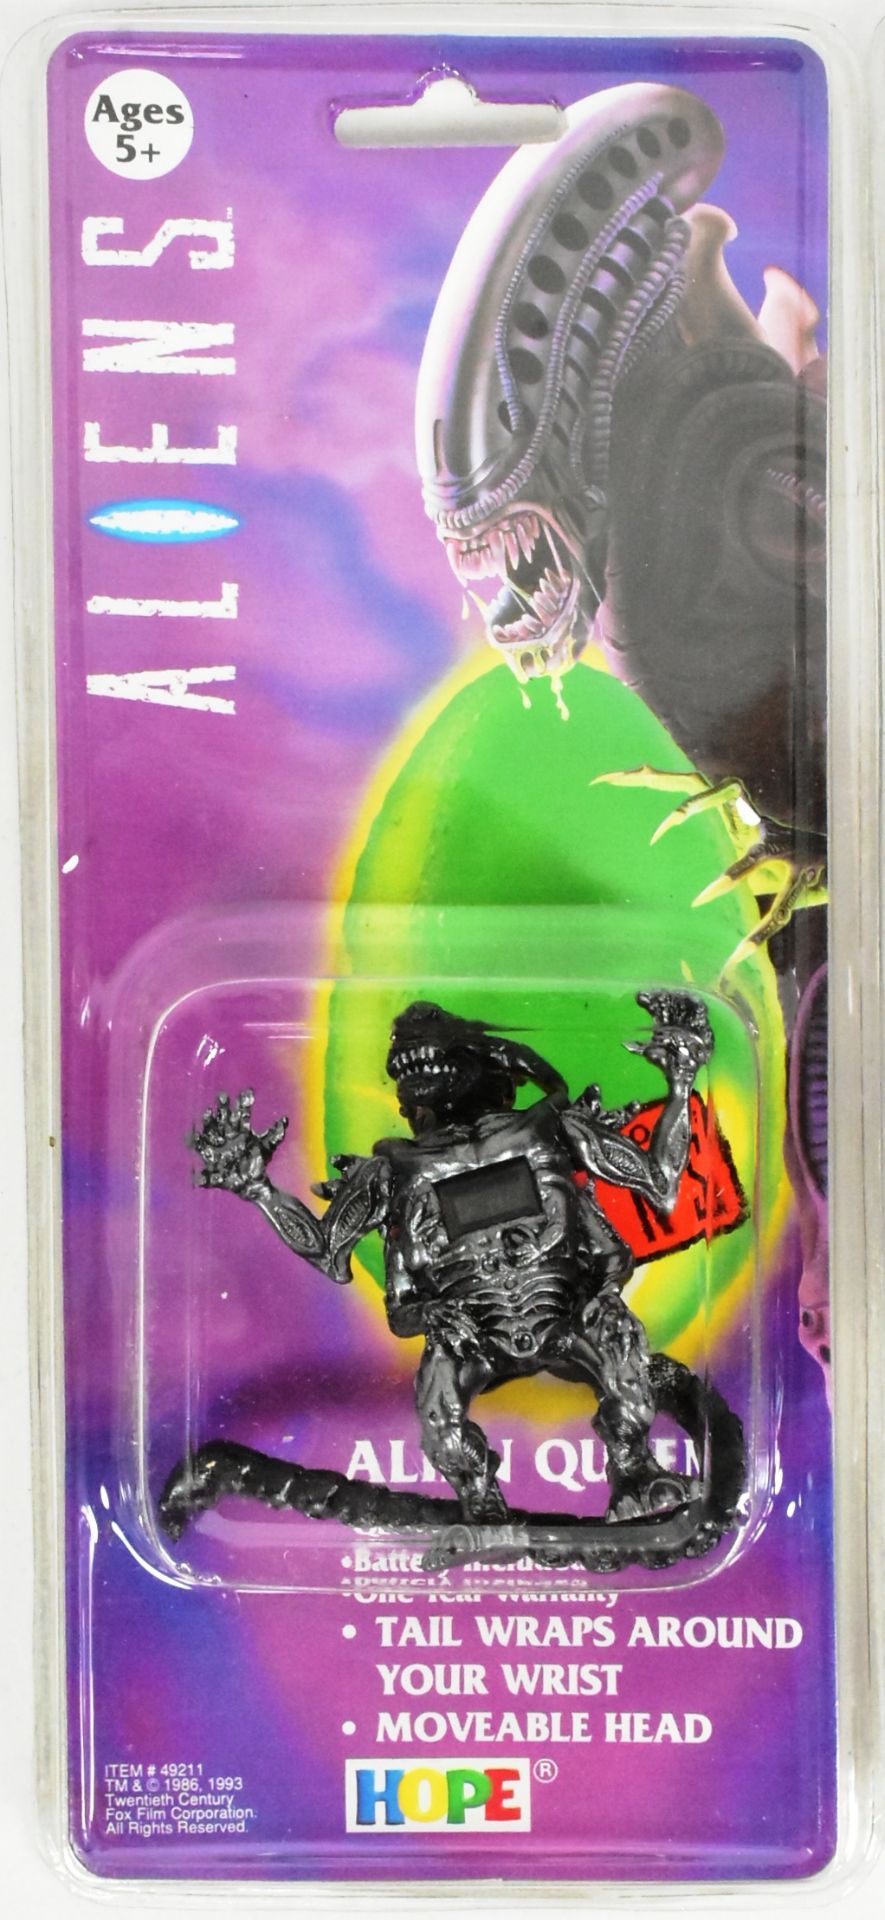 ALIENS - 1993 HOPE INDUSTRIES - COLLECTION OF SEALED WATCHES - Image 2 of 5